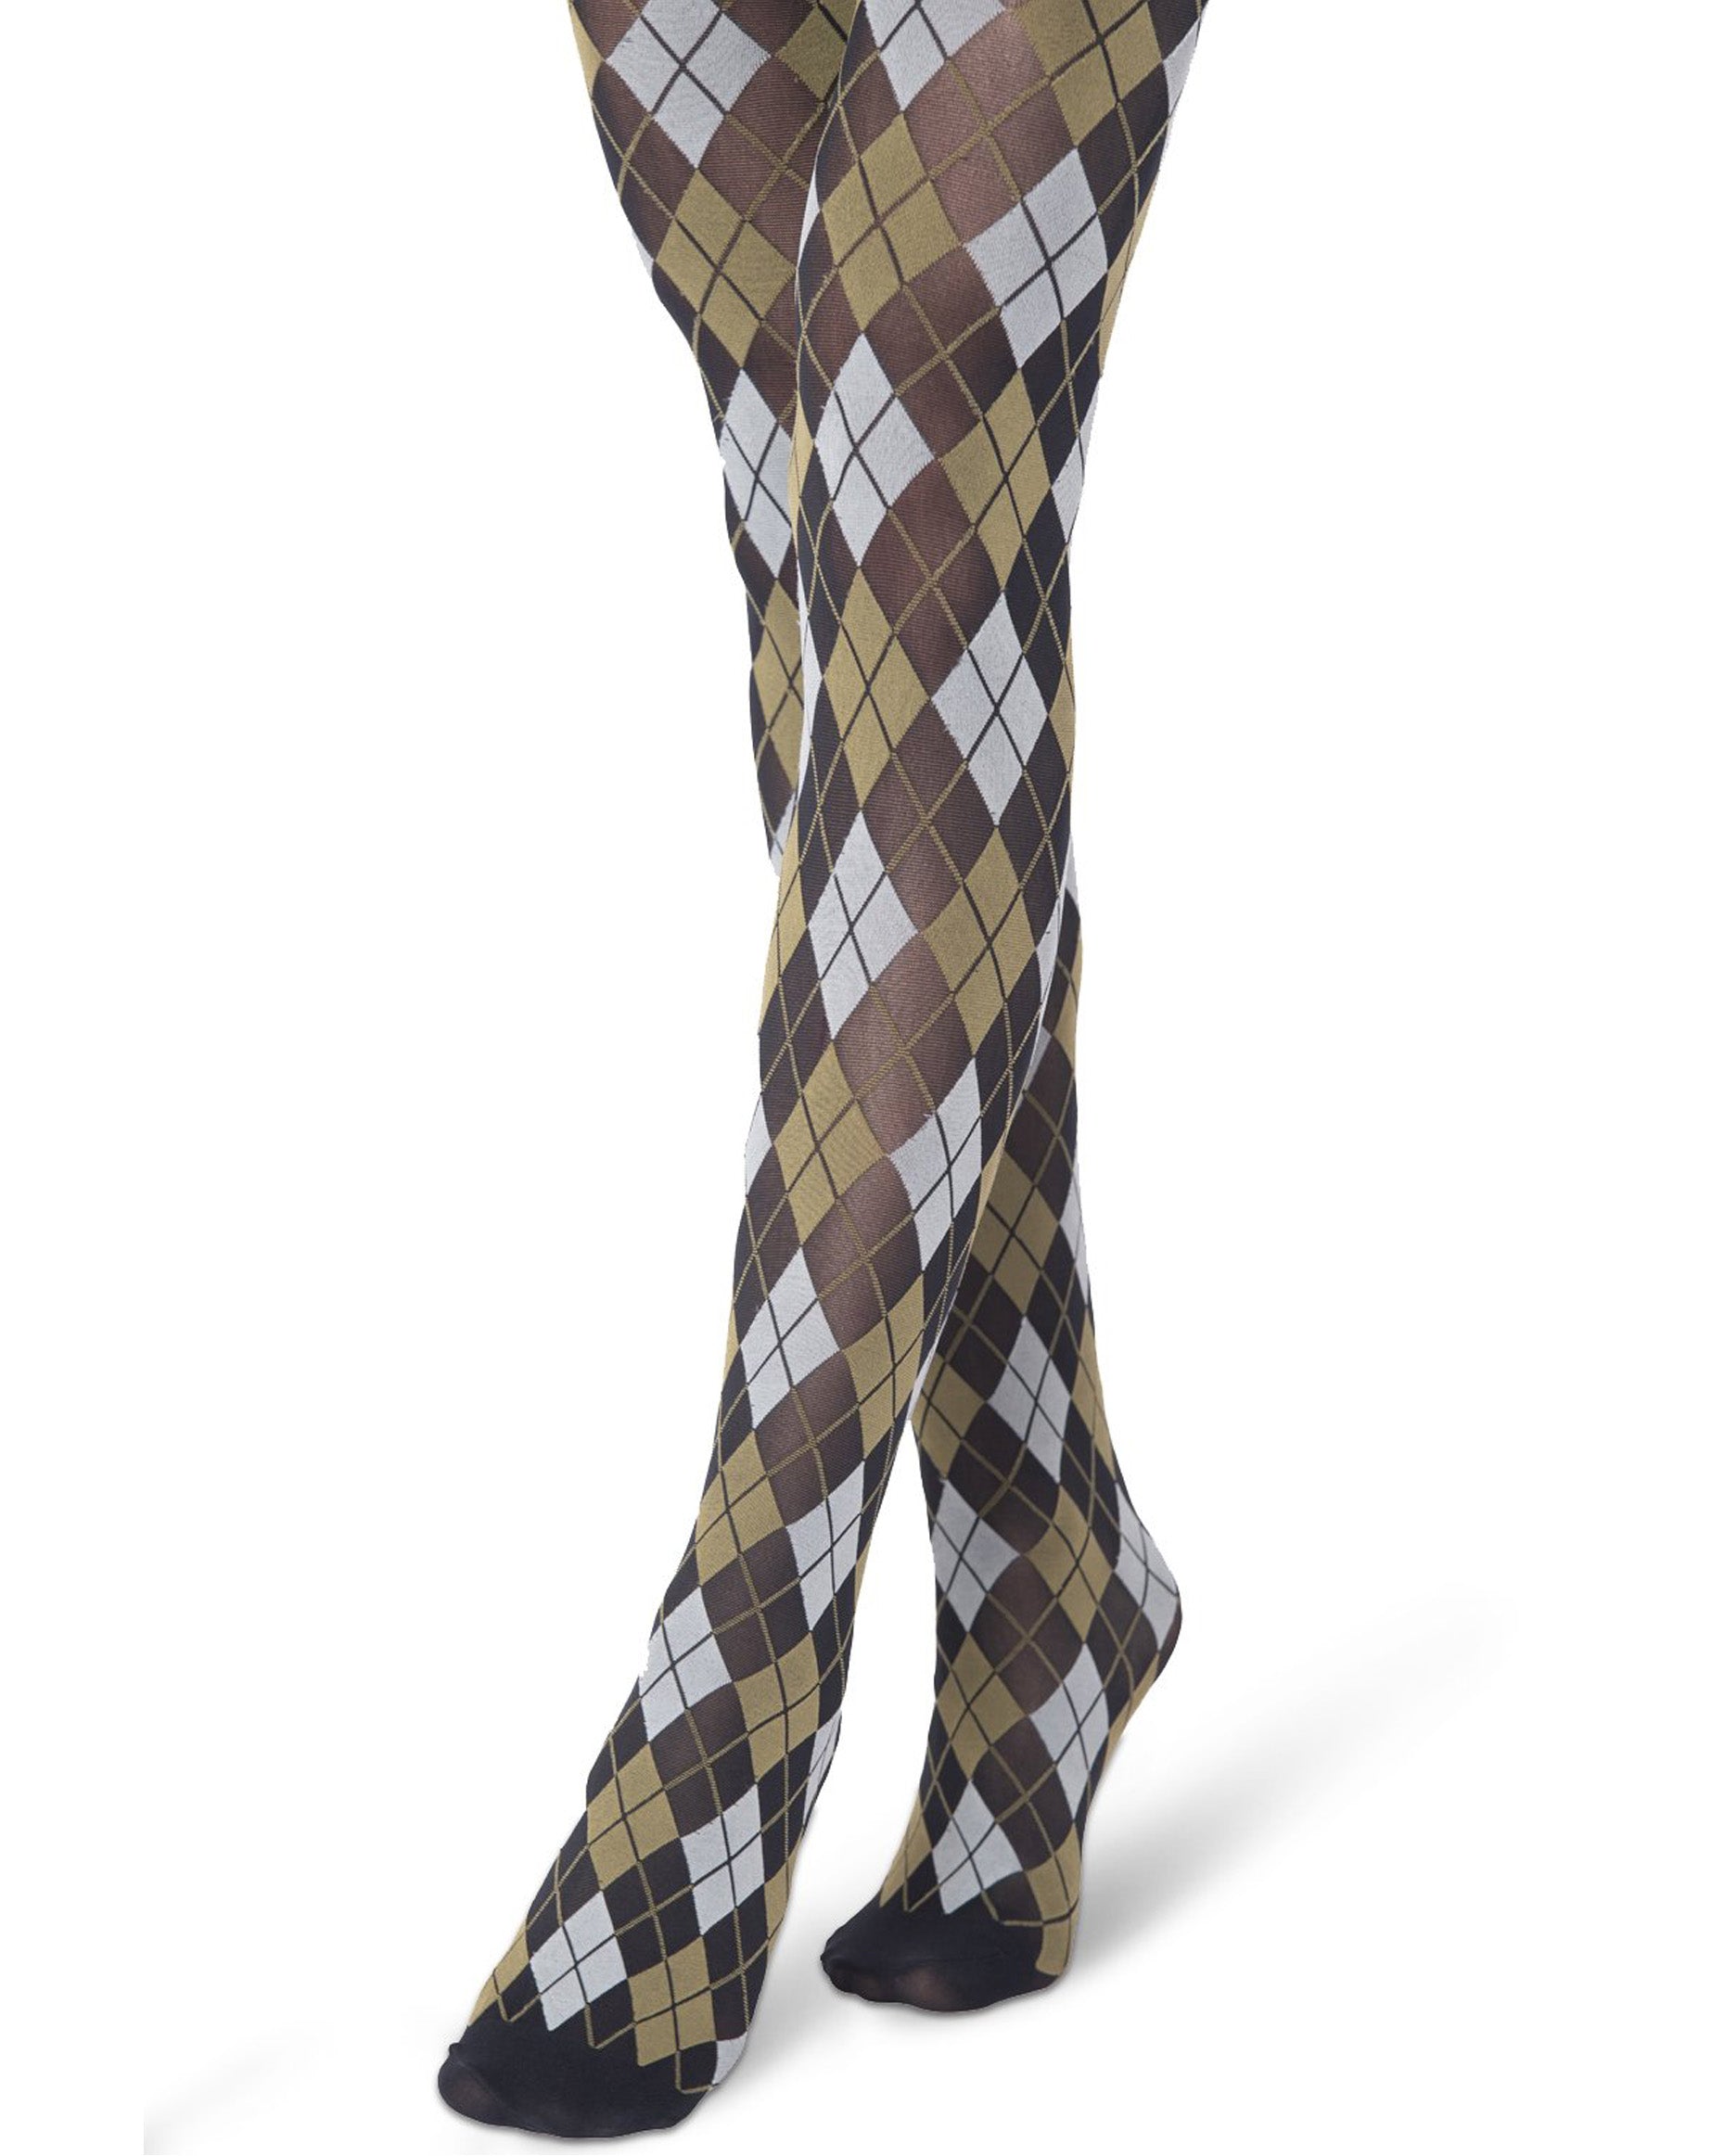 Emilio Cavallini Argyle Tights - Matte opaque black fashion tights with a diamond argyle pattern in khaki green and light grey and black reinforced toe.